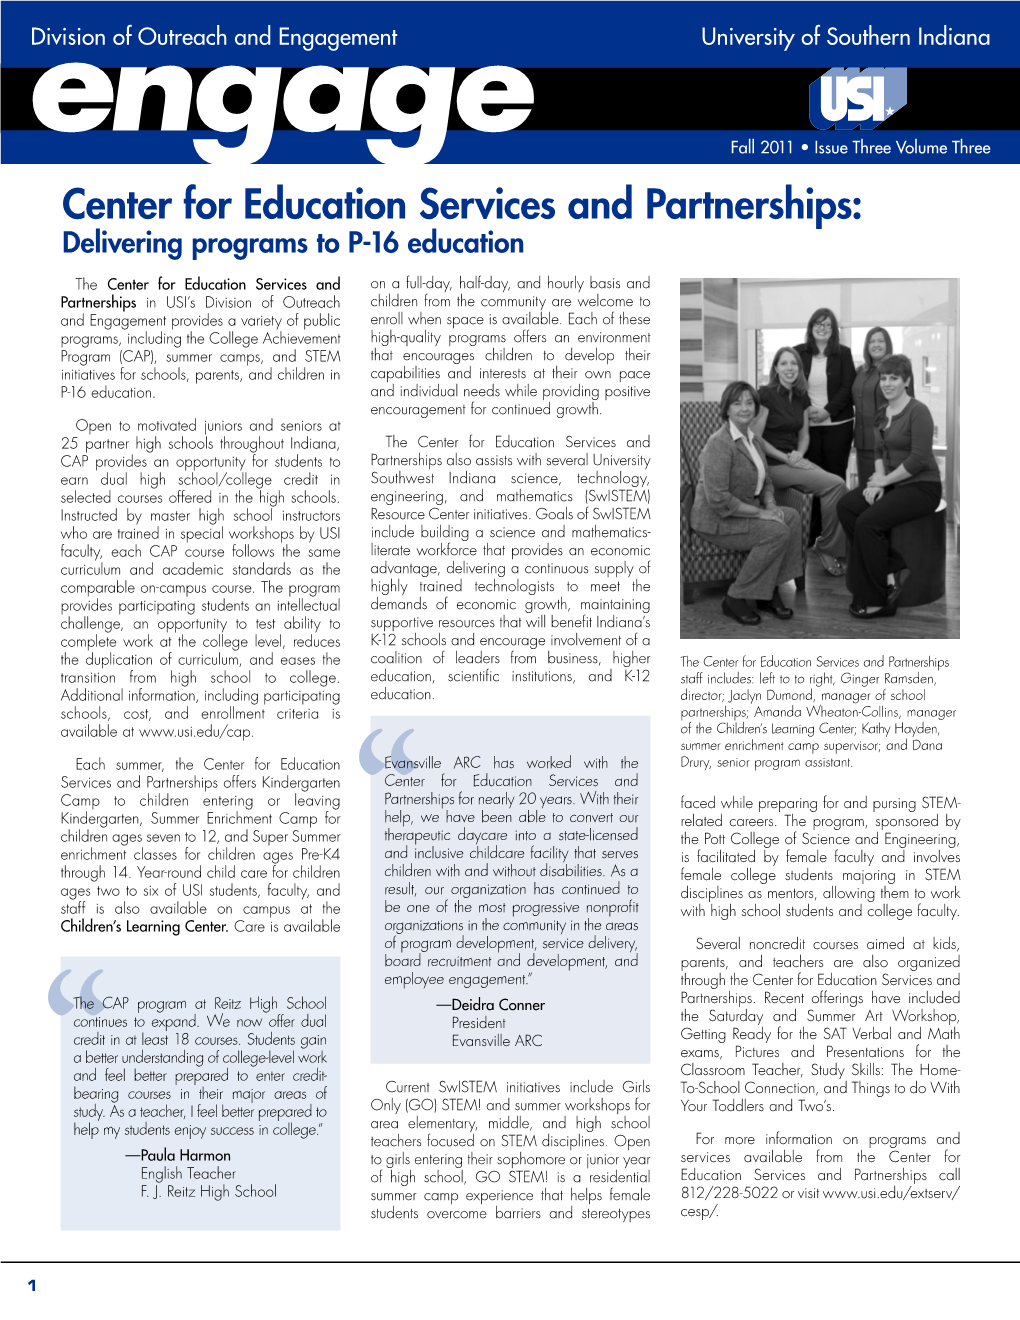 Fall 2011 • Issue Three Volume Three Center for Education Services and Partnerships: Delivering Programs to P-16 Education